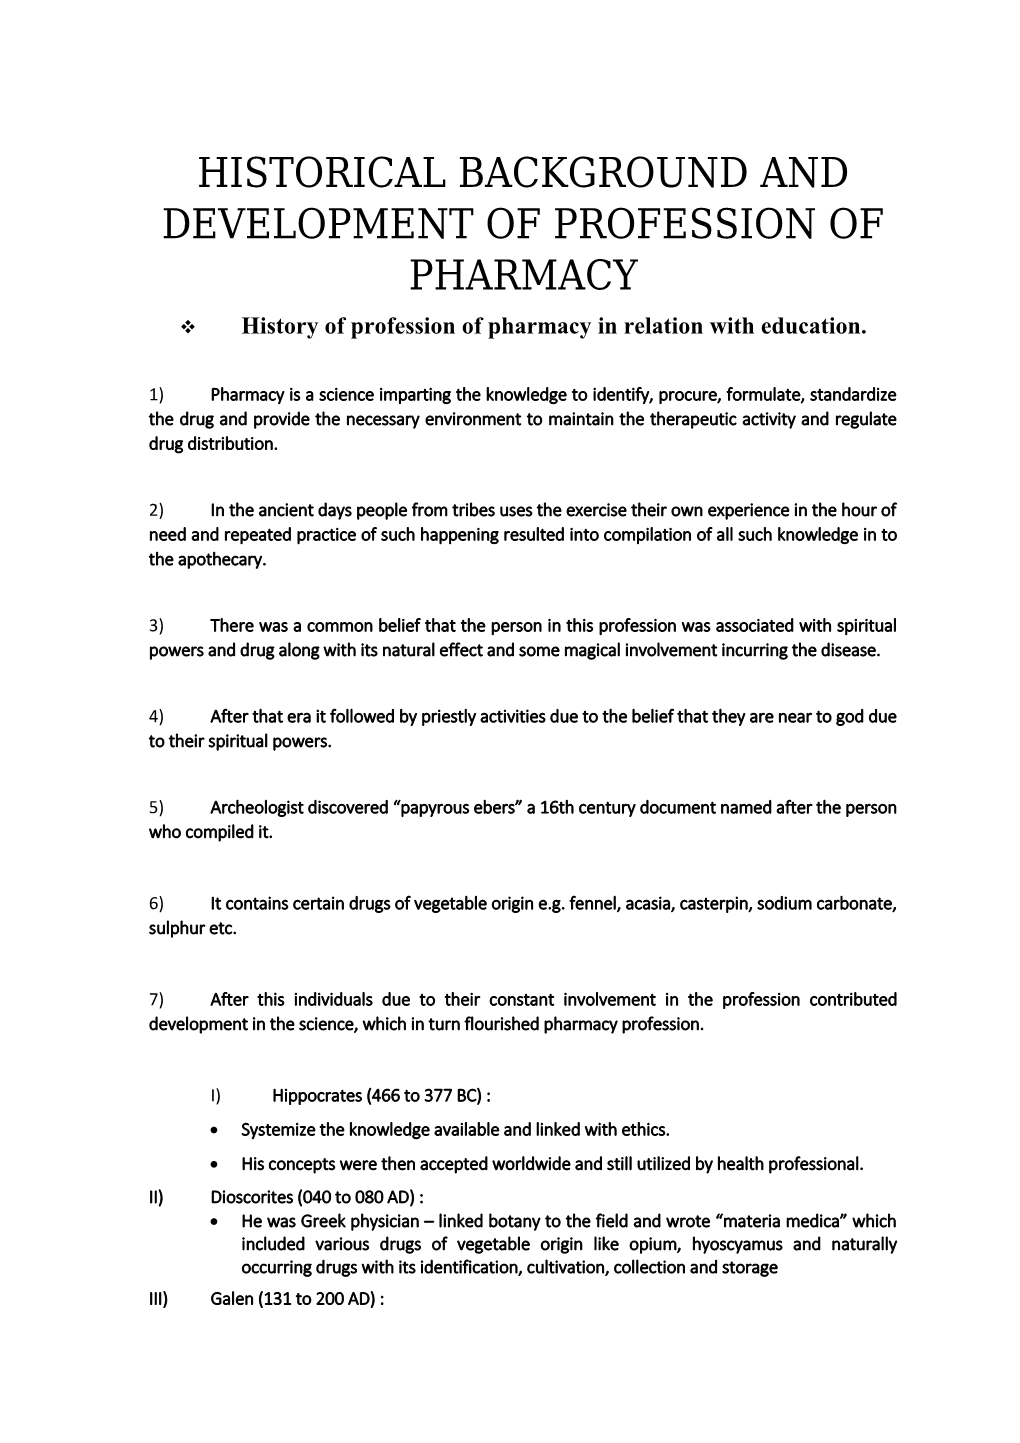 Historical Background and Development of Profession of Pharmacy